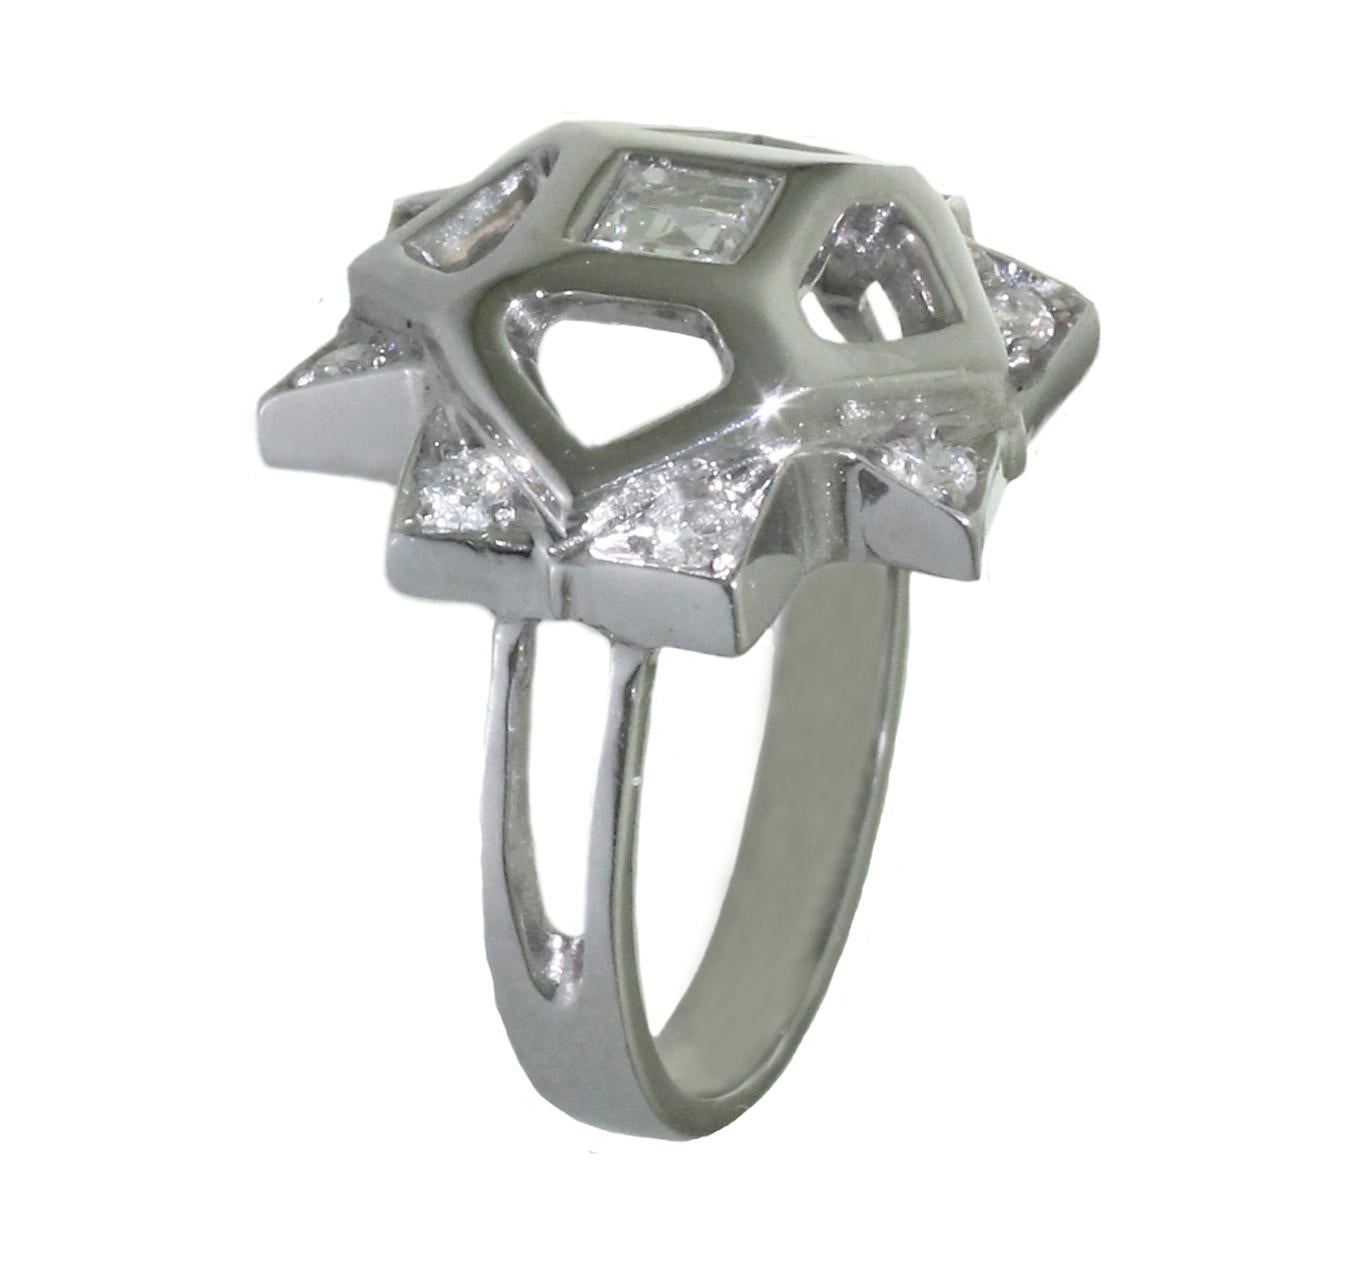 This contemporary White Gold Princess Cut Diamond Engagement Ring symbolizes a Mandala. Representing the universe, mandalas embody the idea that life is never ending and everything is connected, at its core the ring displays the princess cut